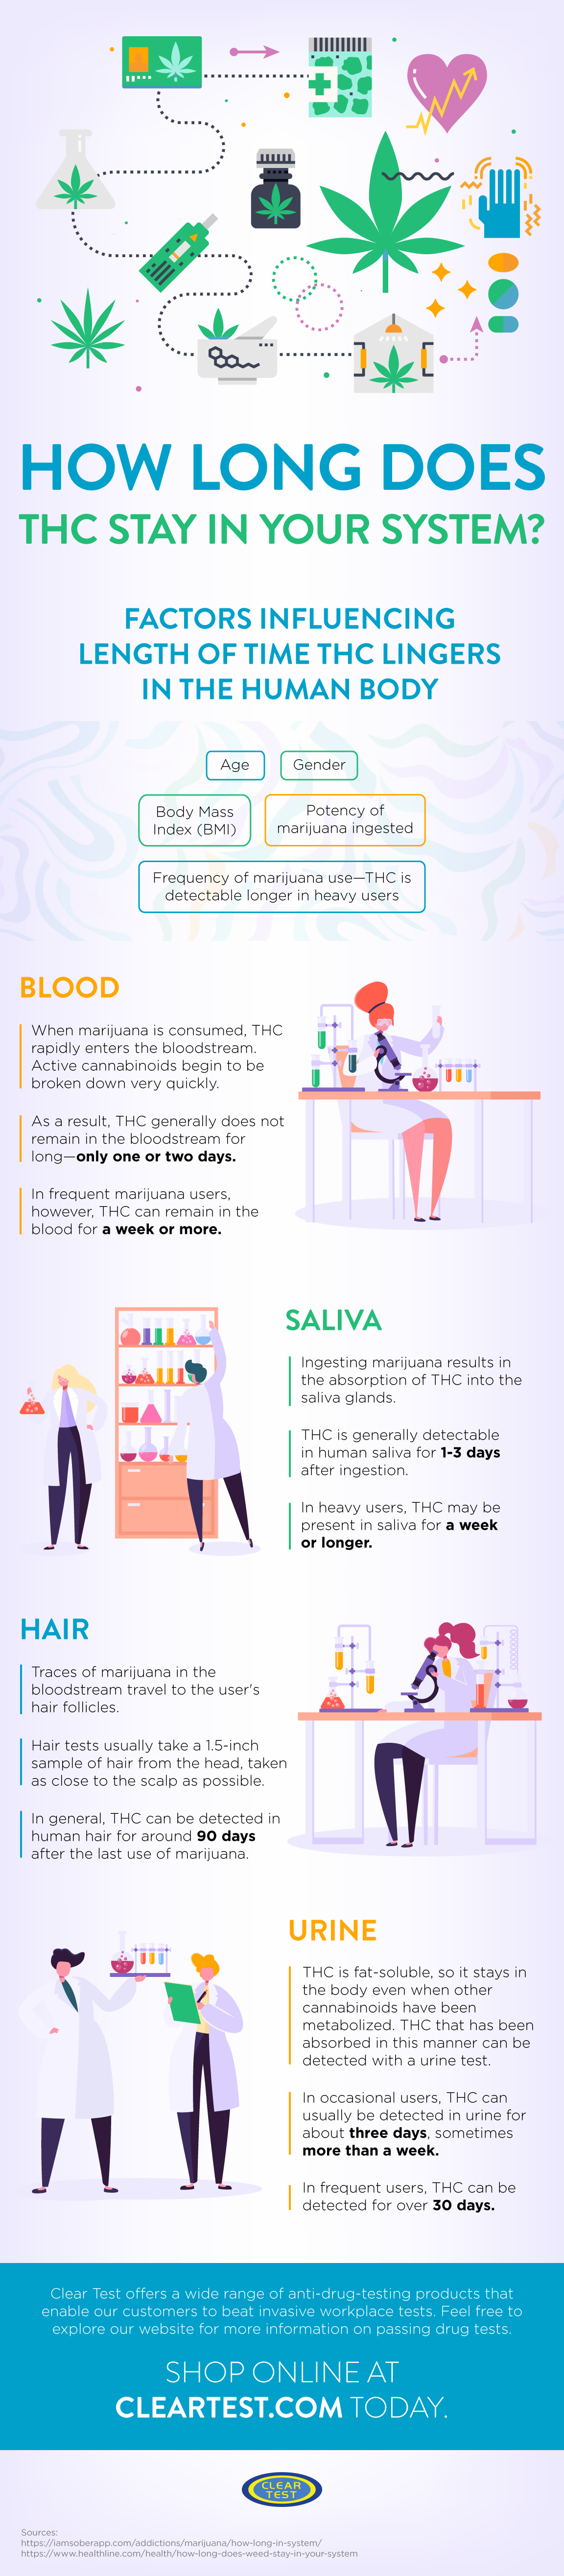 How long does THC stay in your system infographic